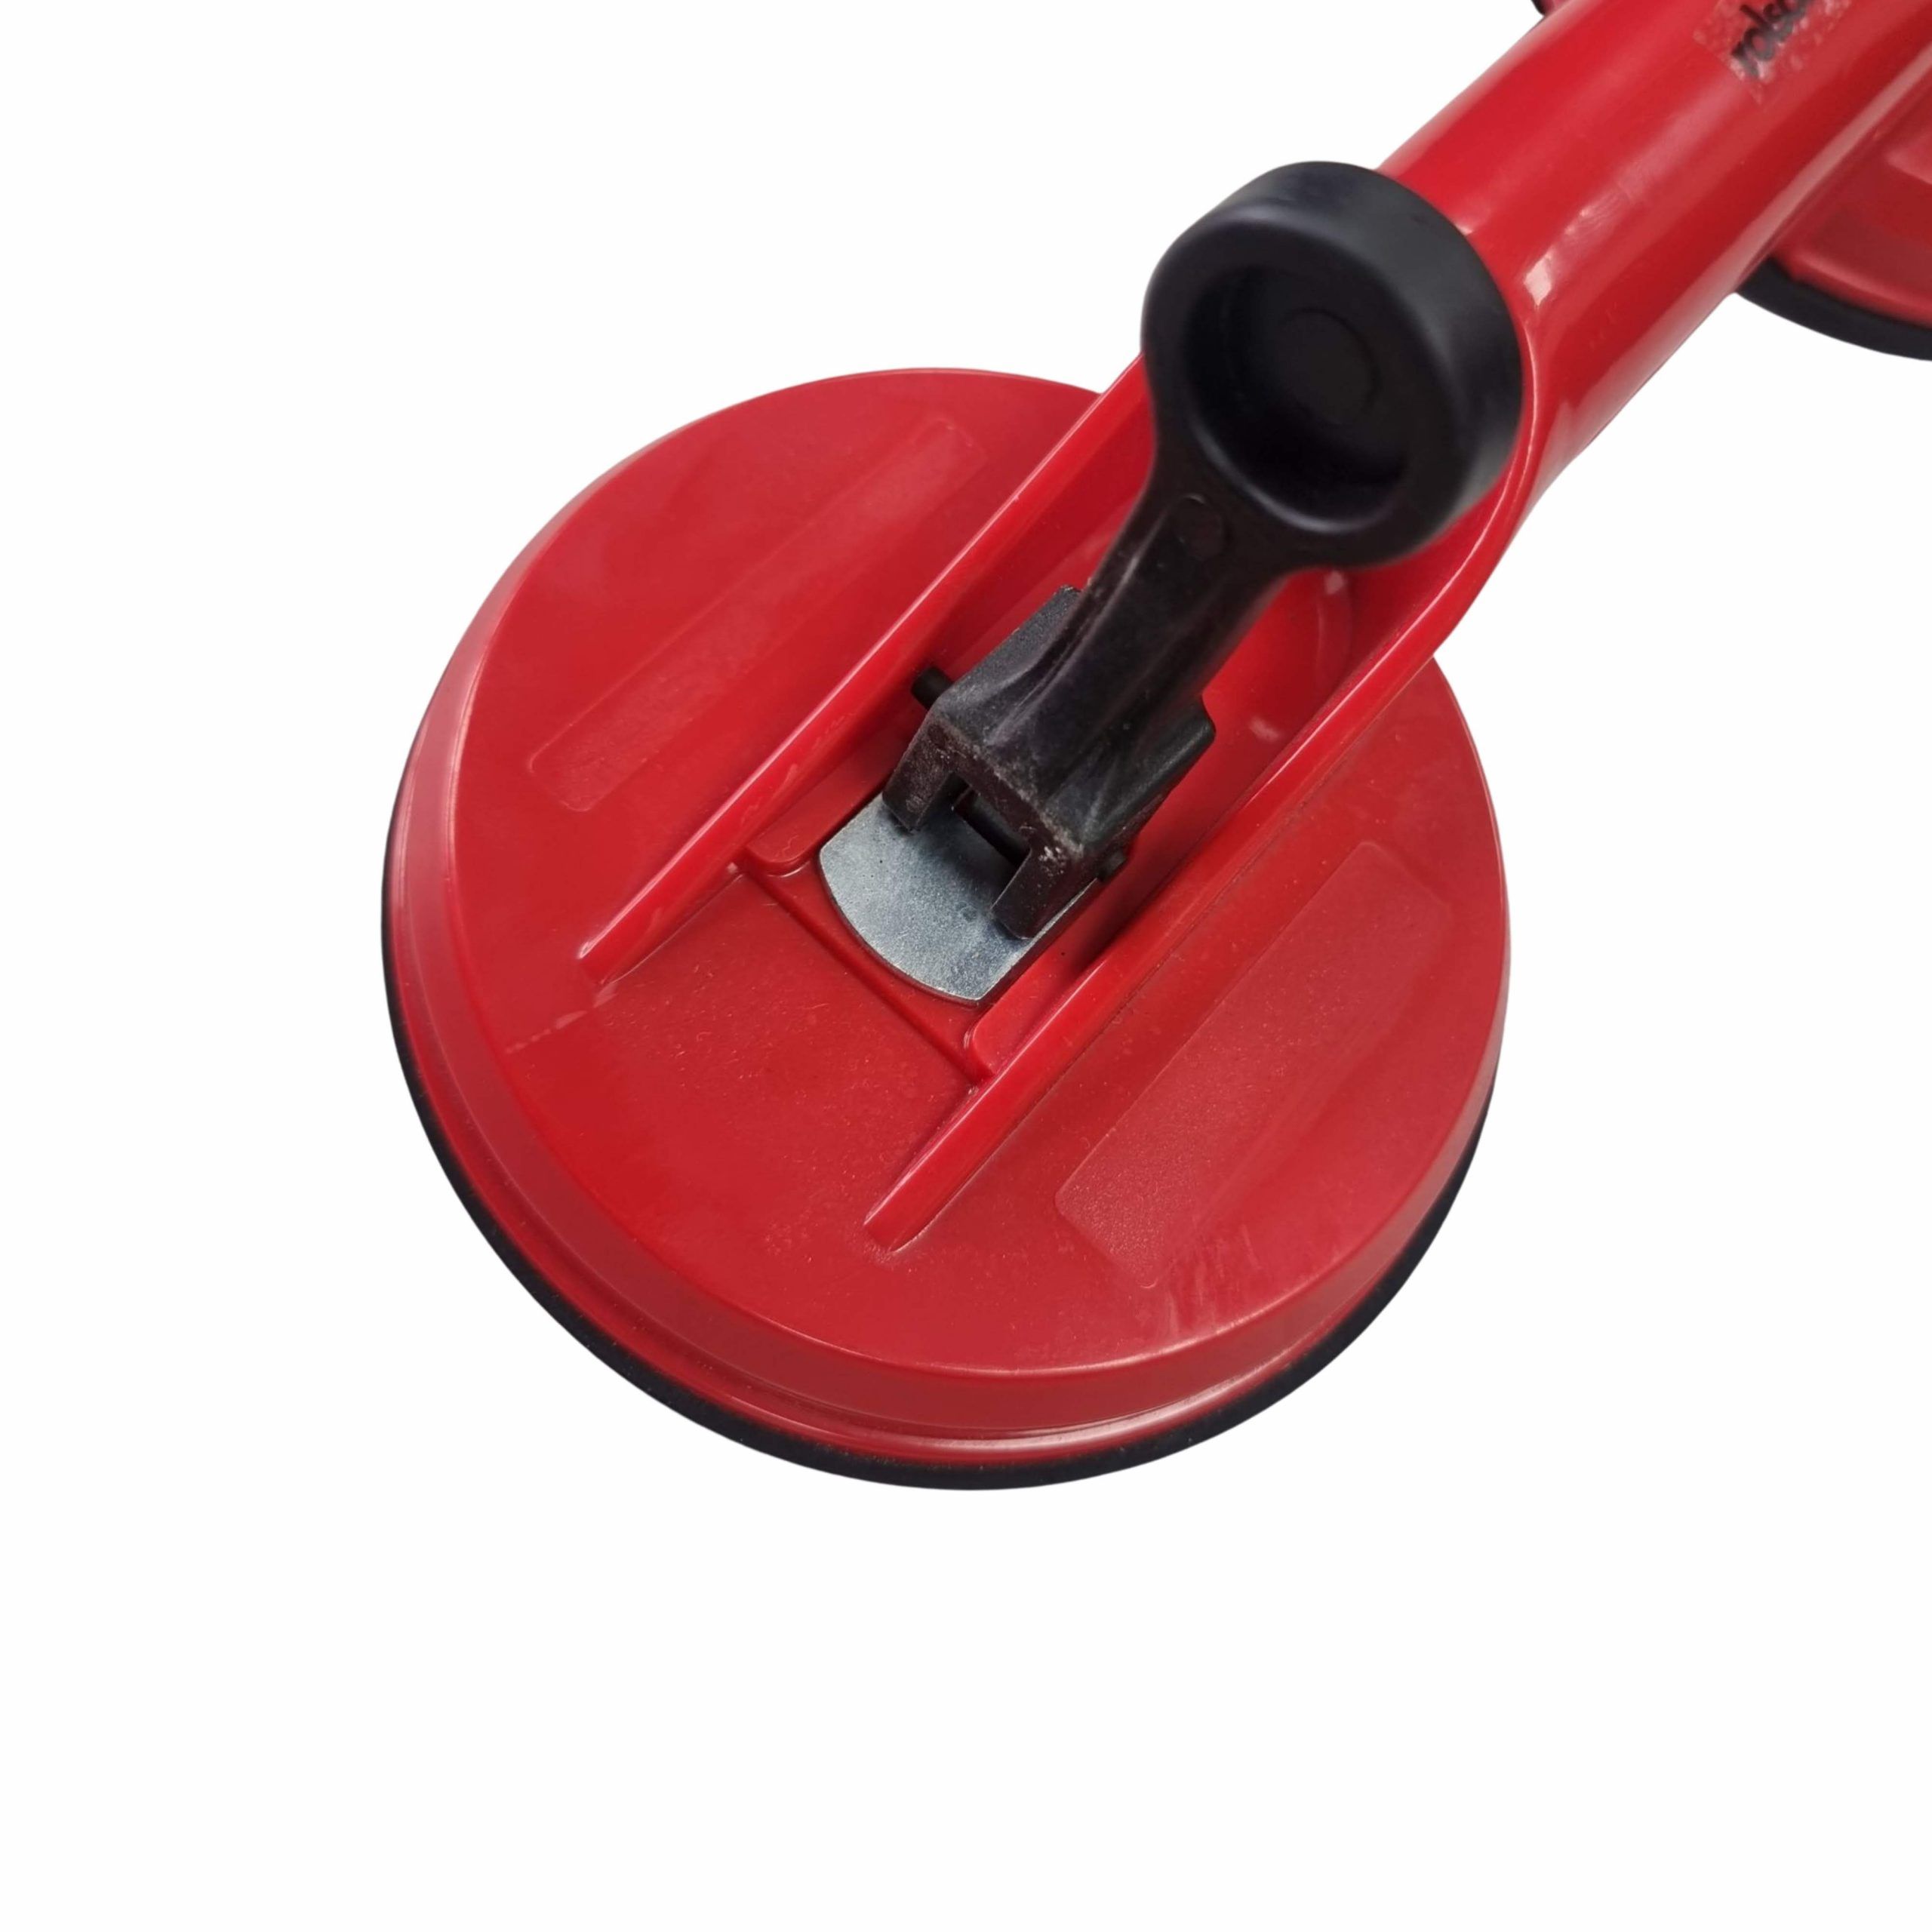 4-2/3 in., 125 lb. Dual Suction Cup Lifter